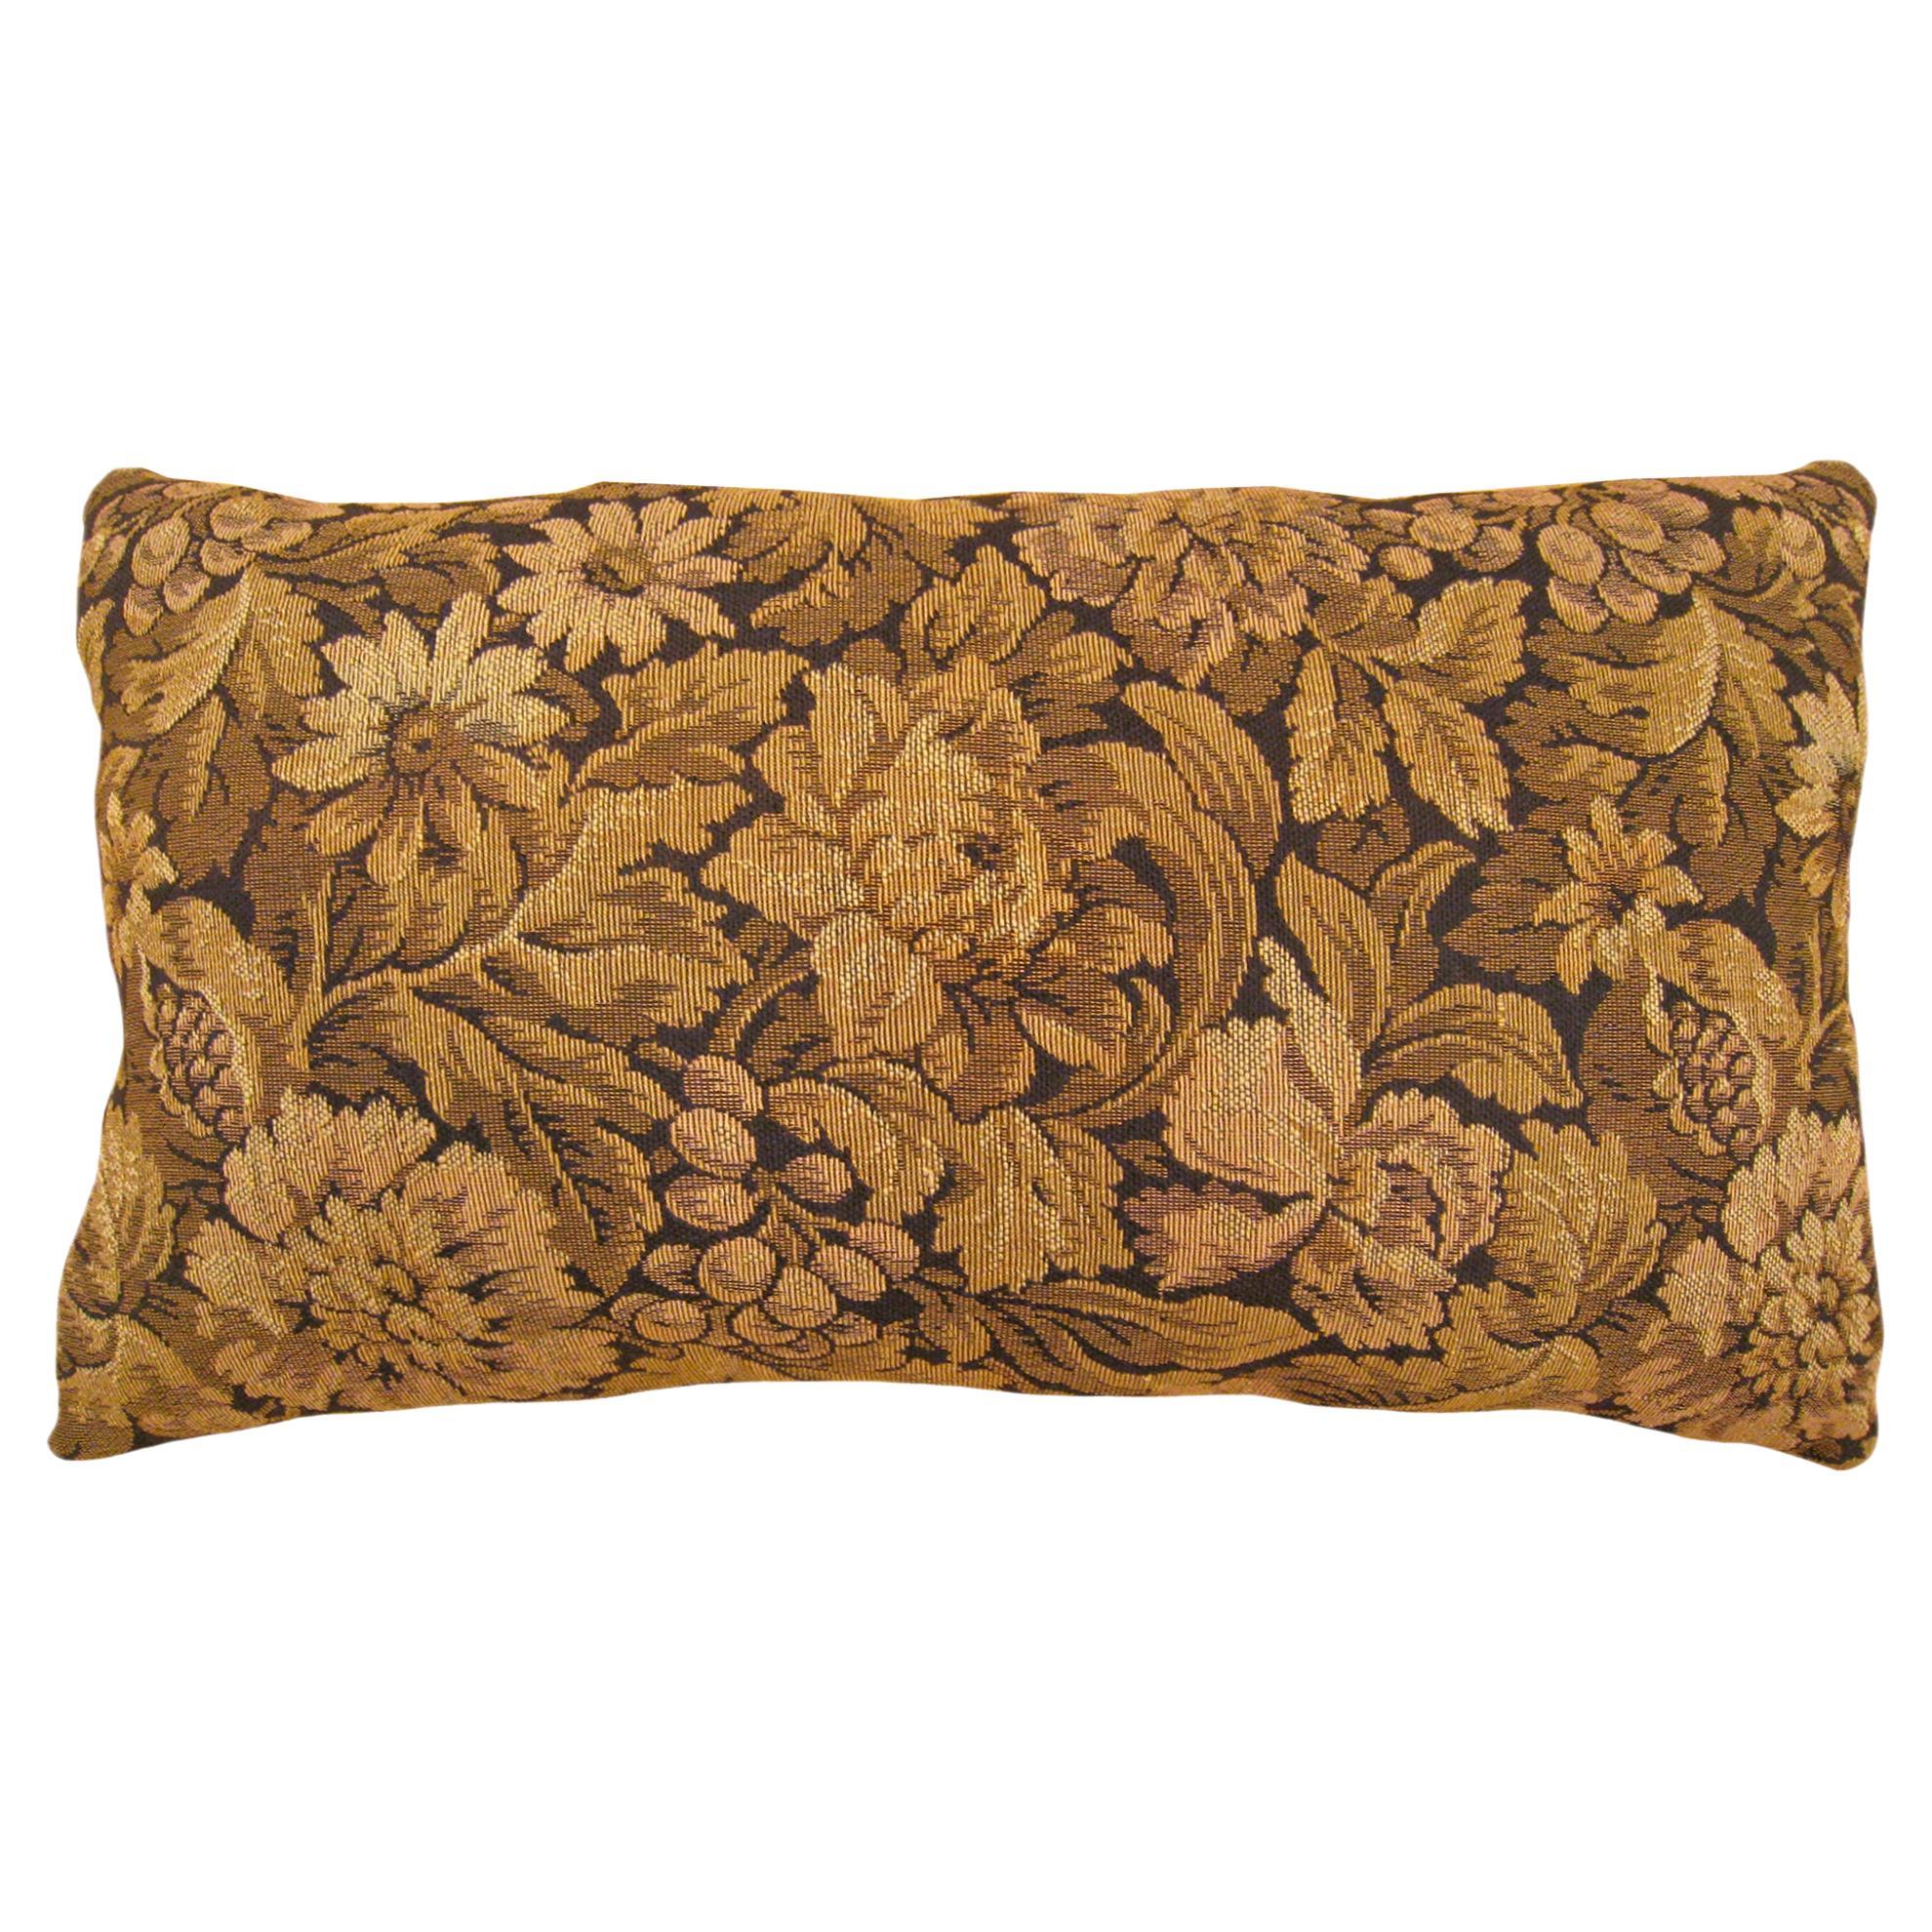 Decorative Antique French Tapestry Pillow with Floral Elements Allover For Sale